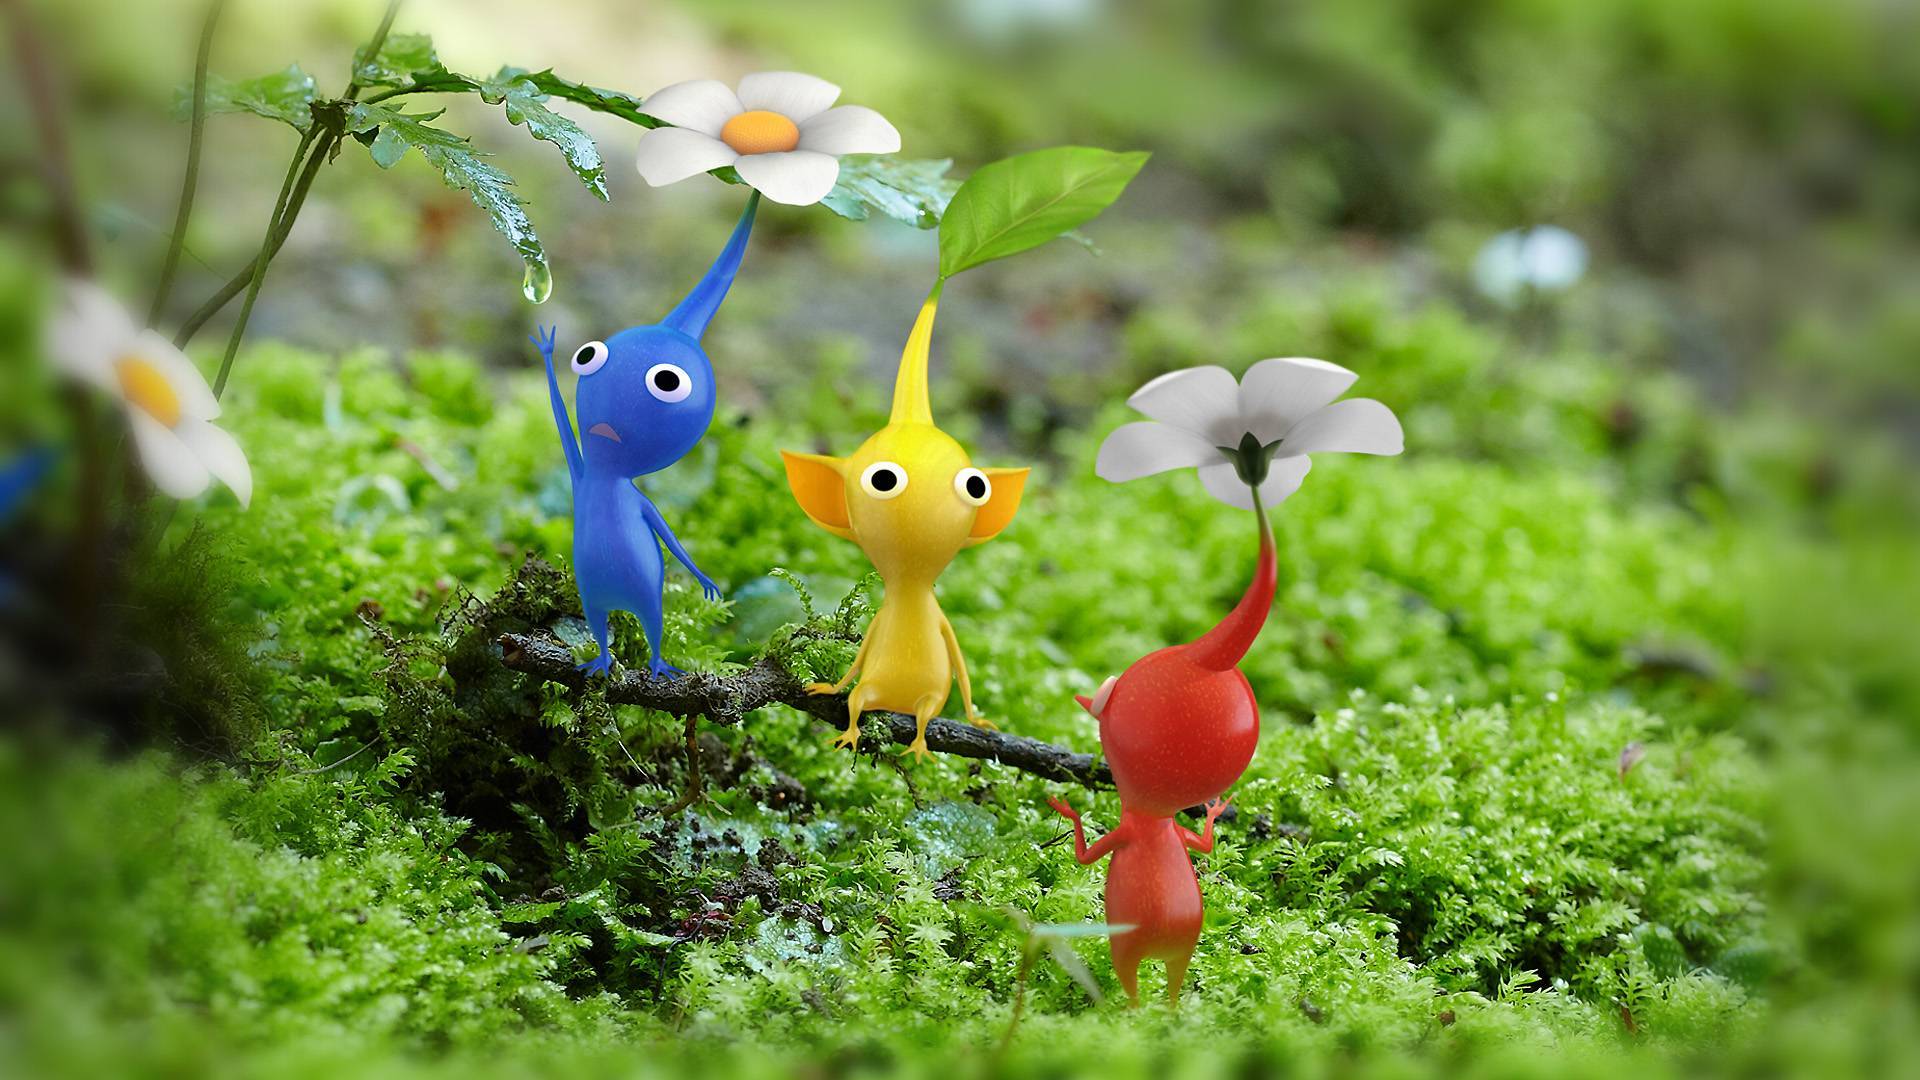 Pikmin 3 Wallpapers in HD GamingBoltcom Video Game News Reviews 1920x1080